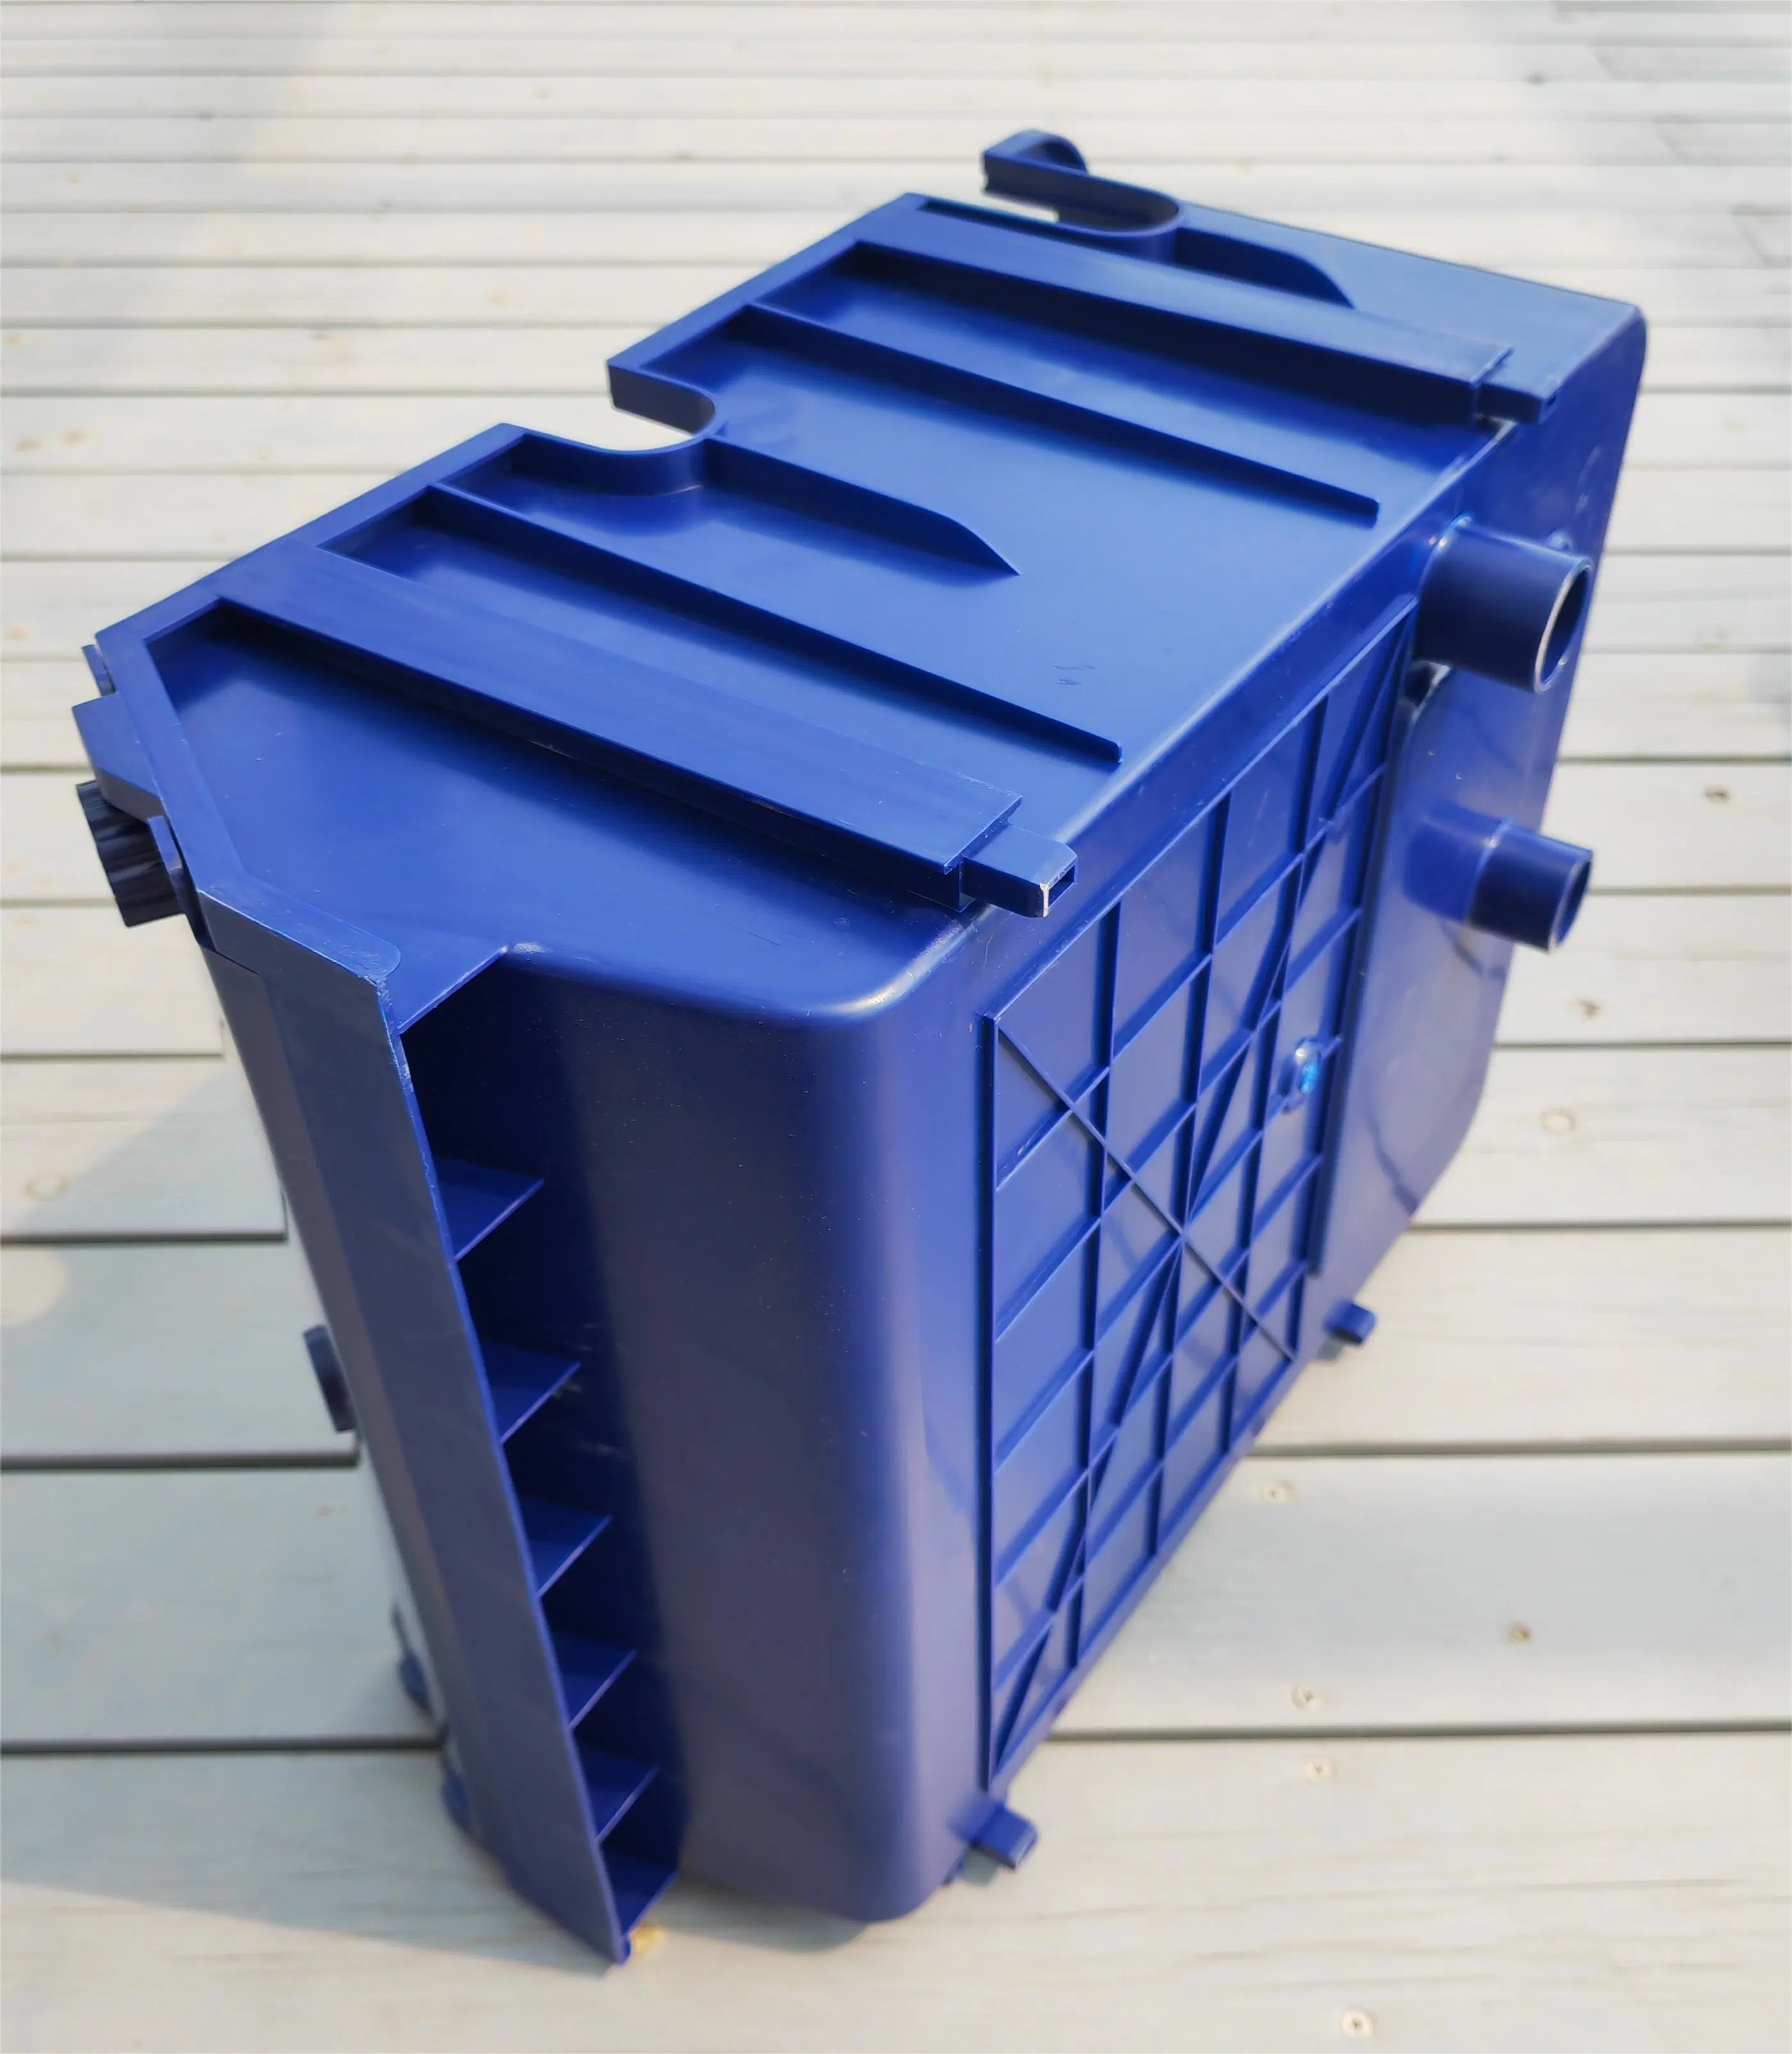 Best Quality Seafood Plastic Crates Crab Lobster Aquaculture Folding Stackable Turnover Box with Lid Plastic Farming System Box